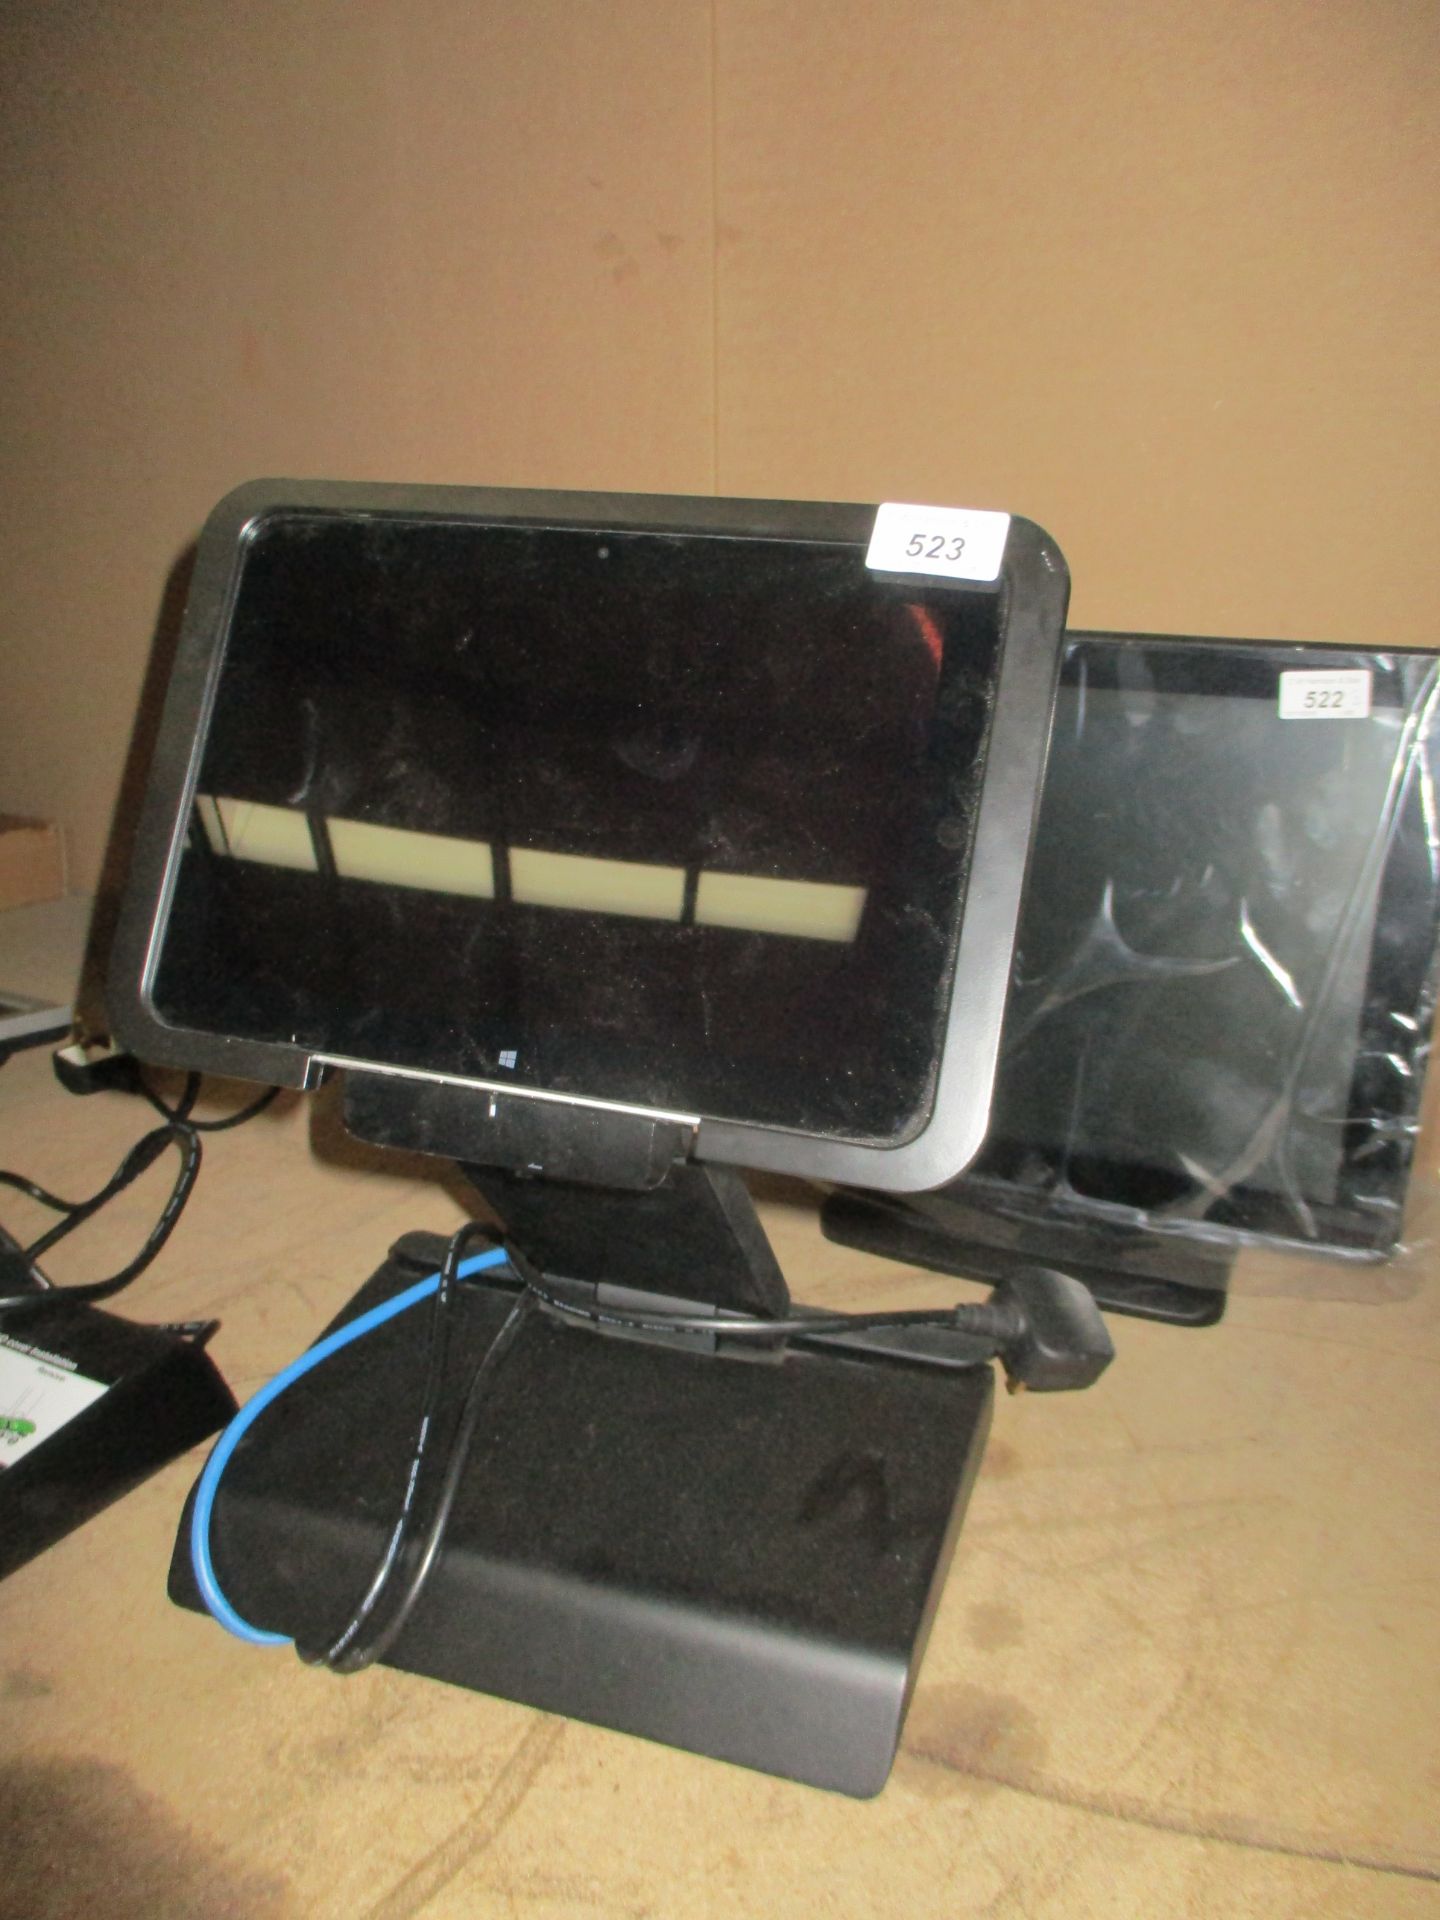 A HP Elitepad 1000 10" tablet complete with adjustable stand - power leads